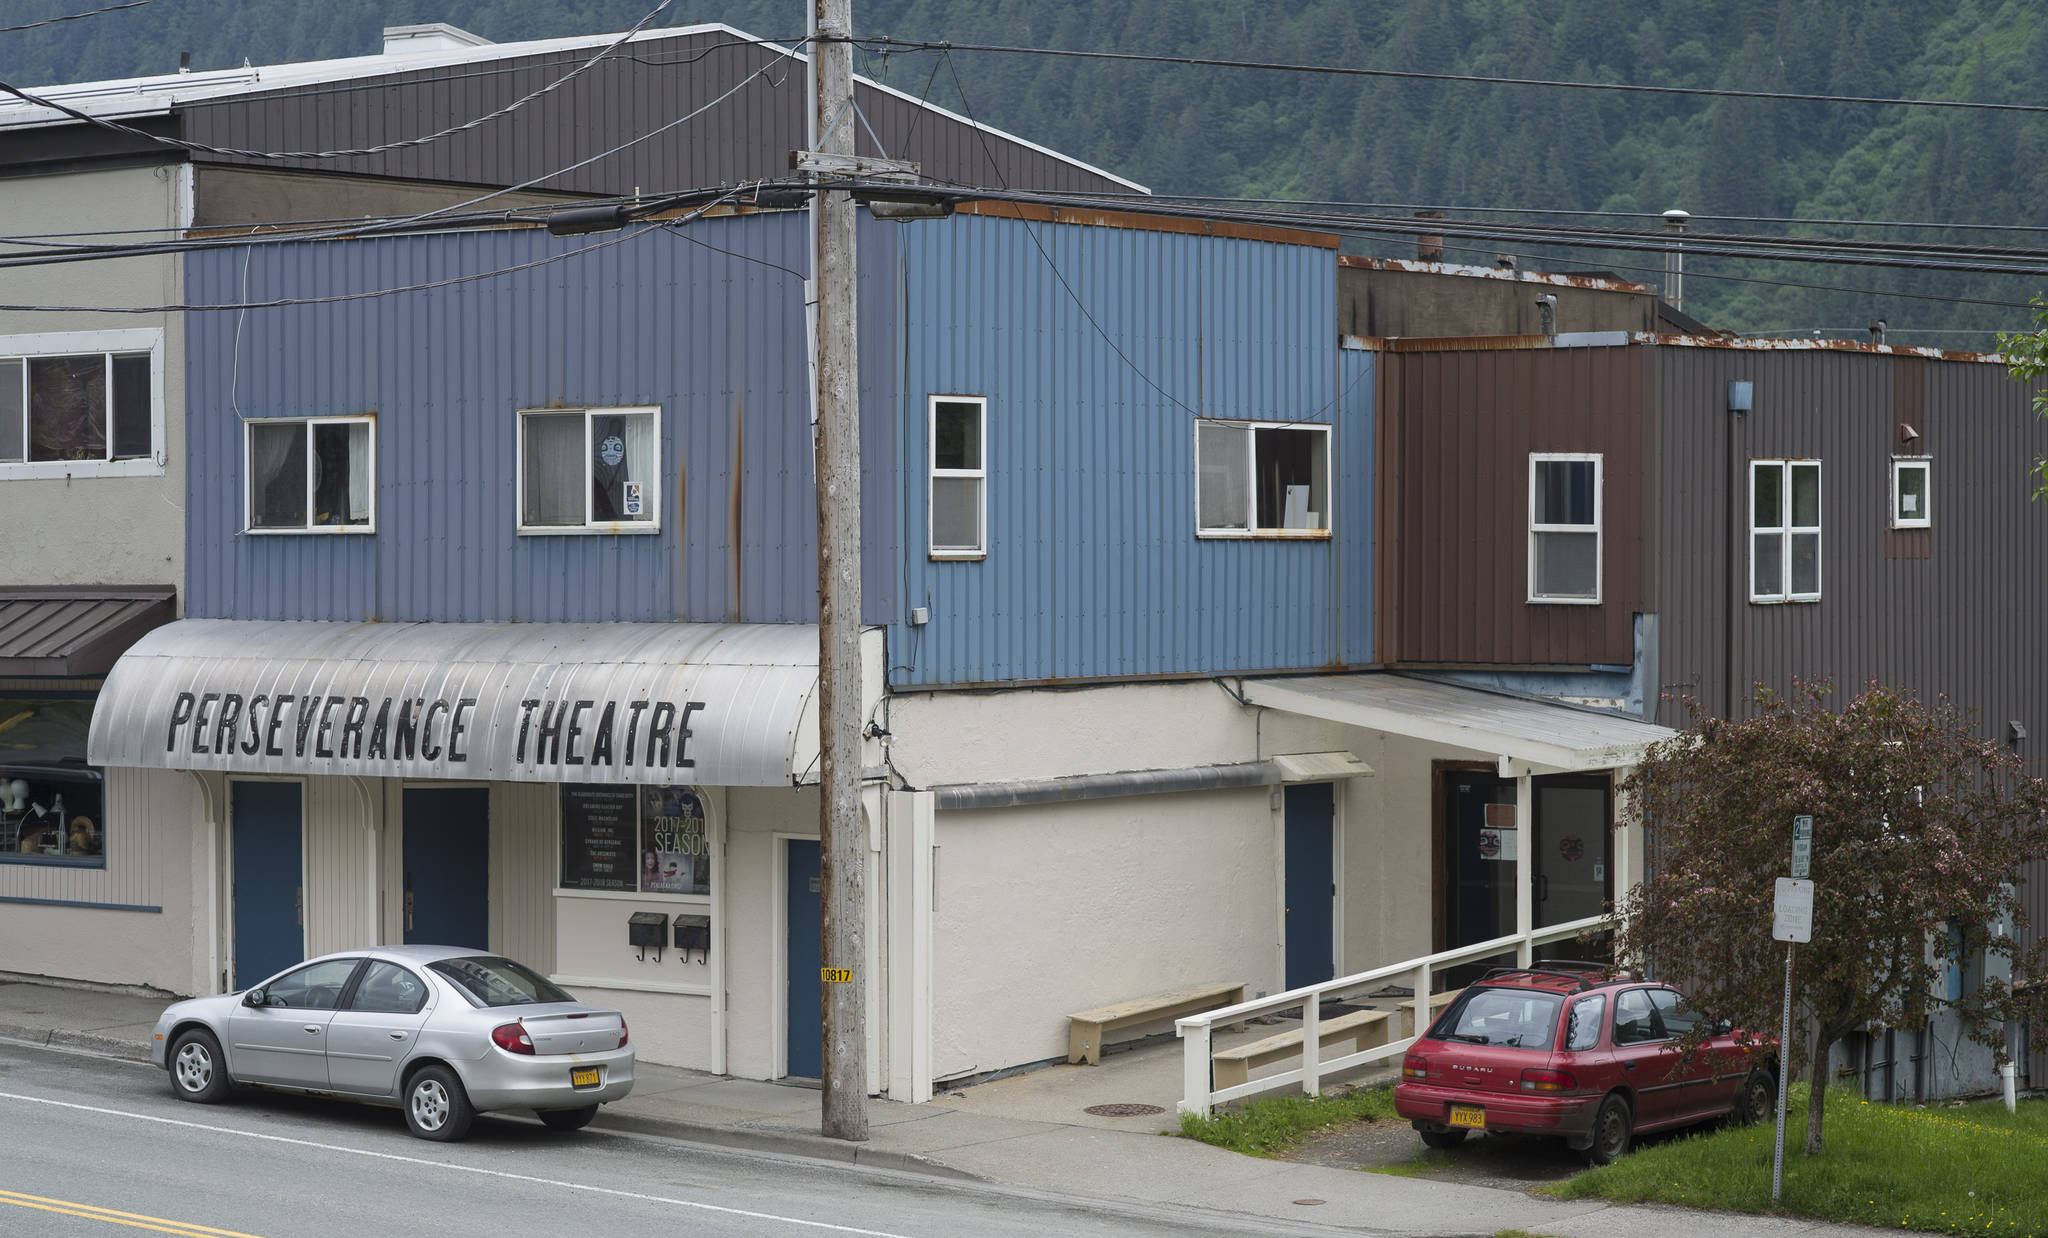 Perseverance Theatre in Douglas was founded in 1979 by Molly Smith and is currently led by Executive Artistic Director Art Rotch. (Michael Penn | Juneau Empire)